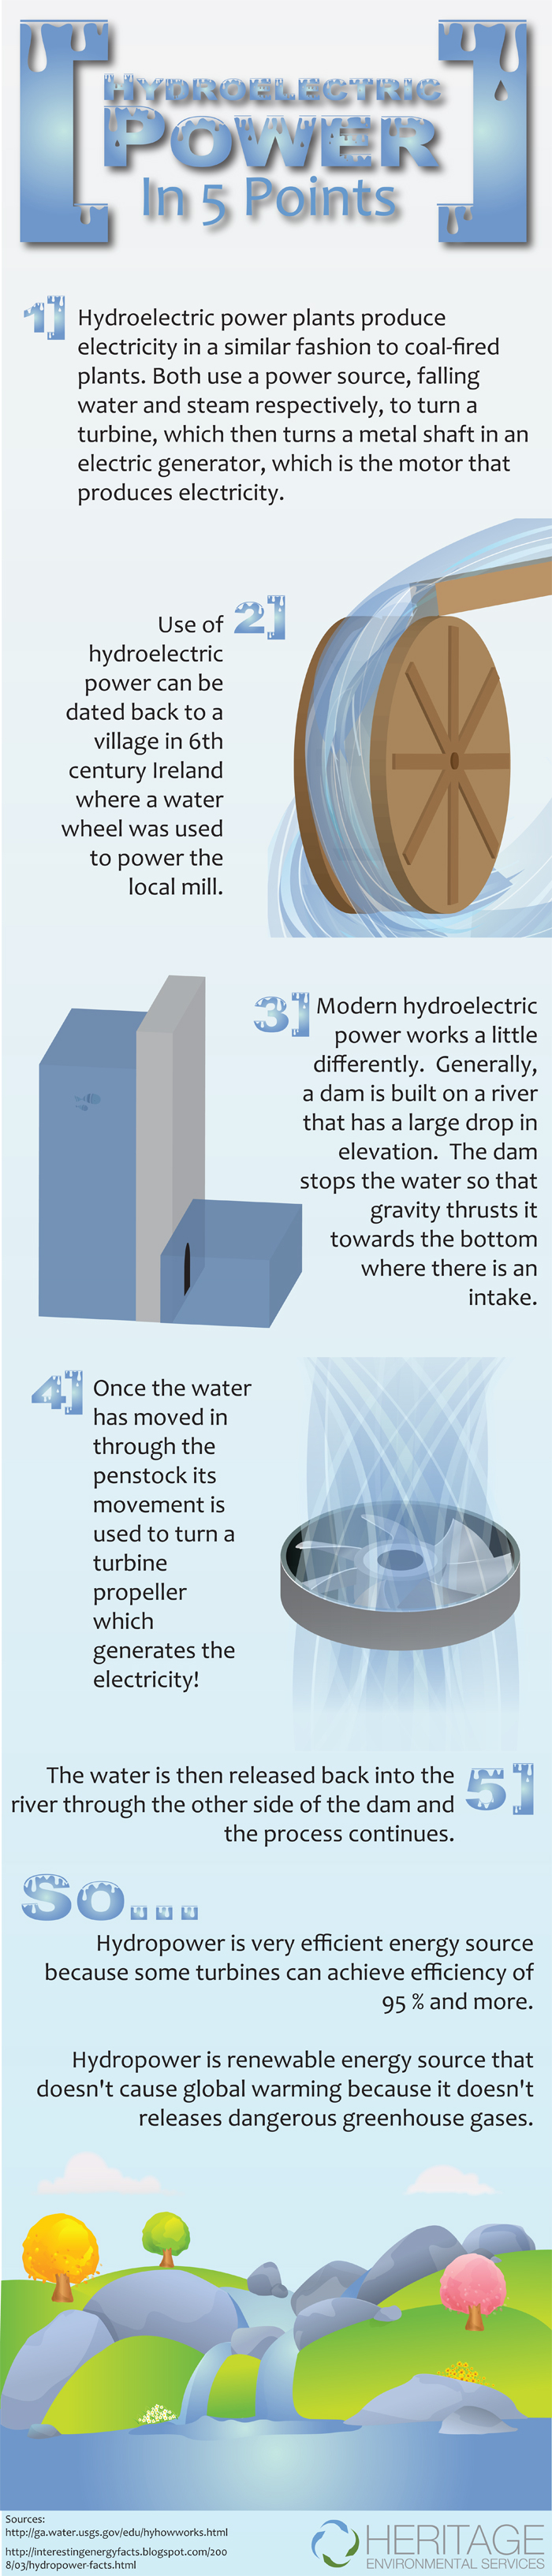 Hydroelectric Power In 5 Points